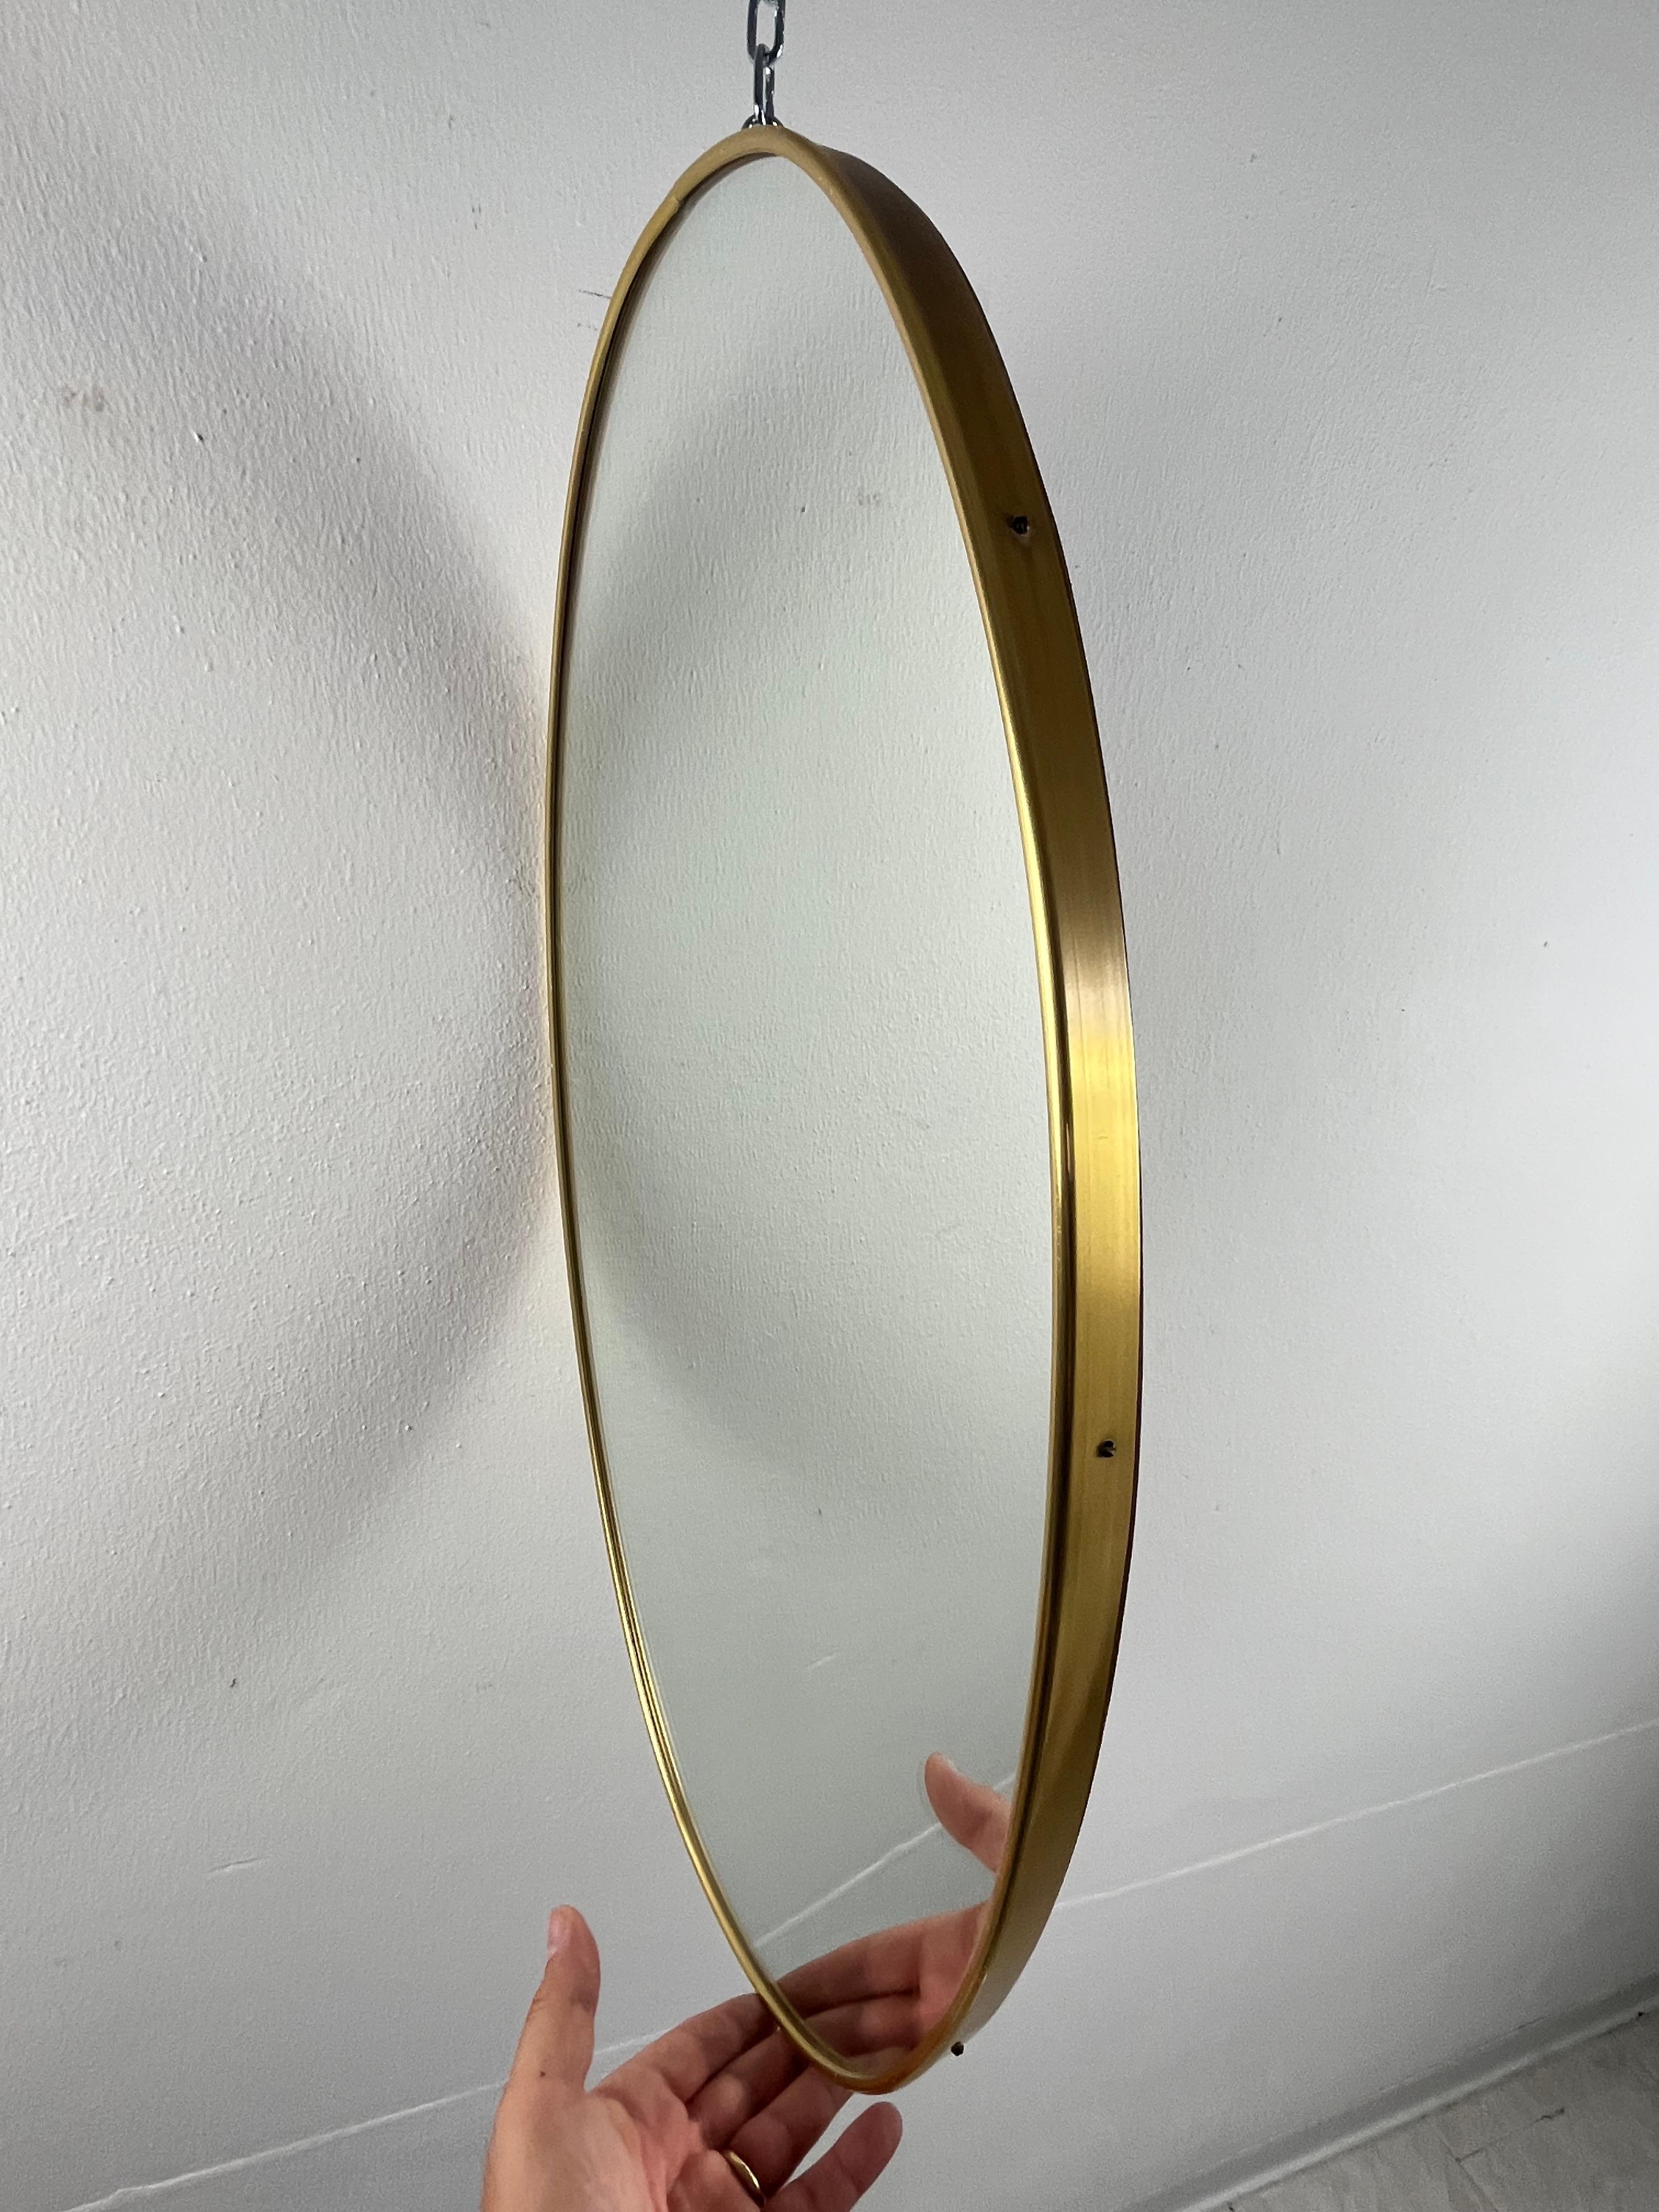 Mid-20th Century Mid-Century Brass Wall Mirror Attributed To Gio Ponti 1960s For Sale